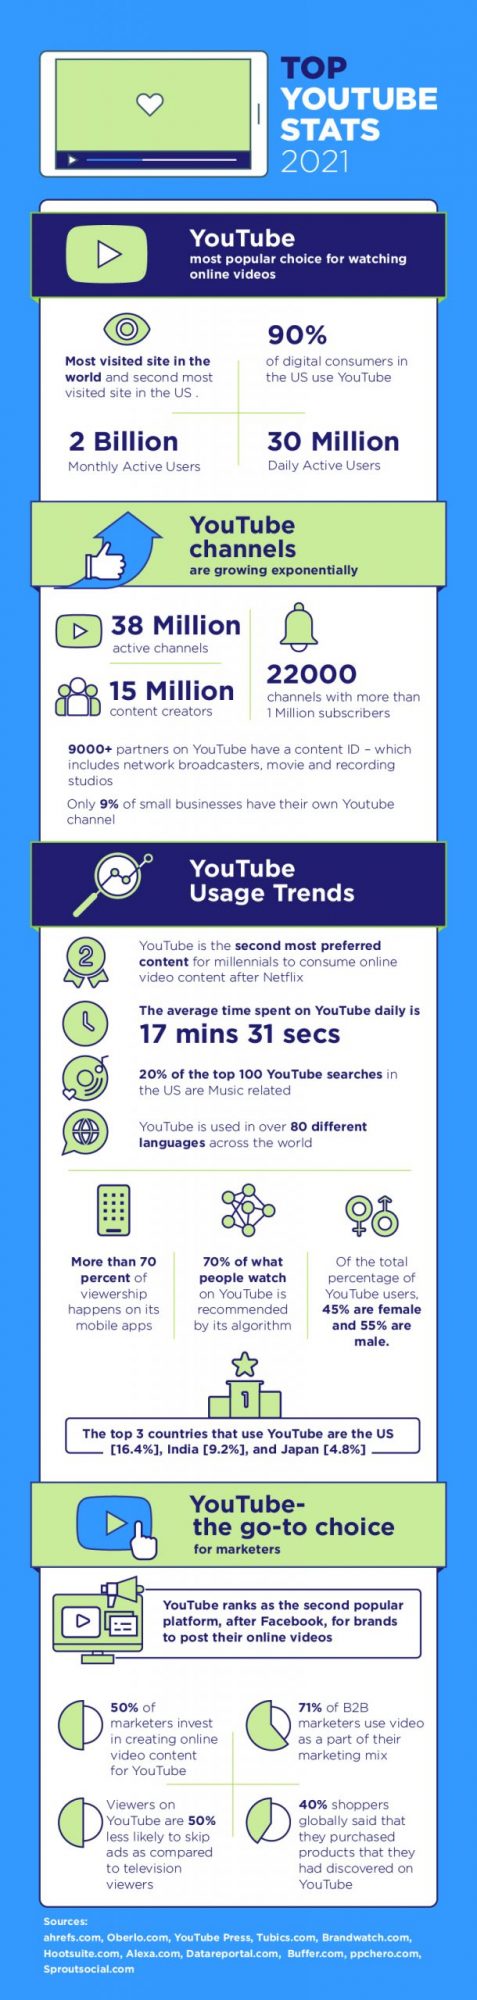 Youtube-Stats-Infographic_V2_800-by-3360